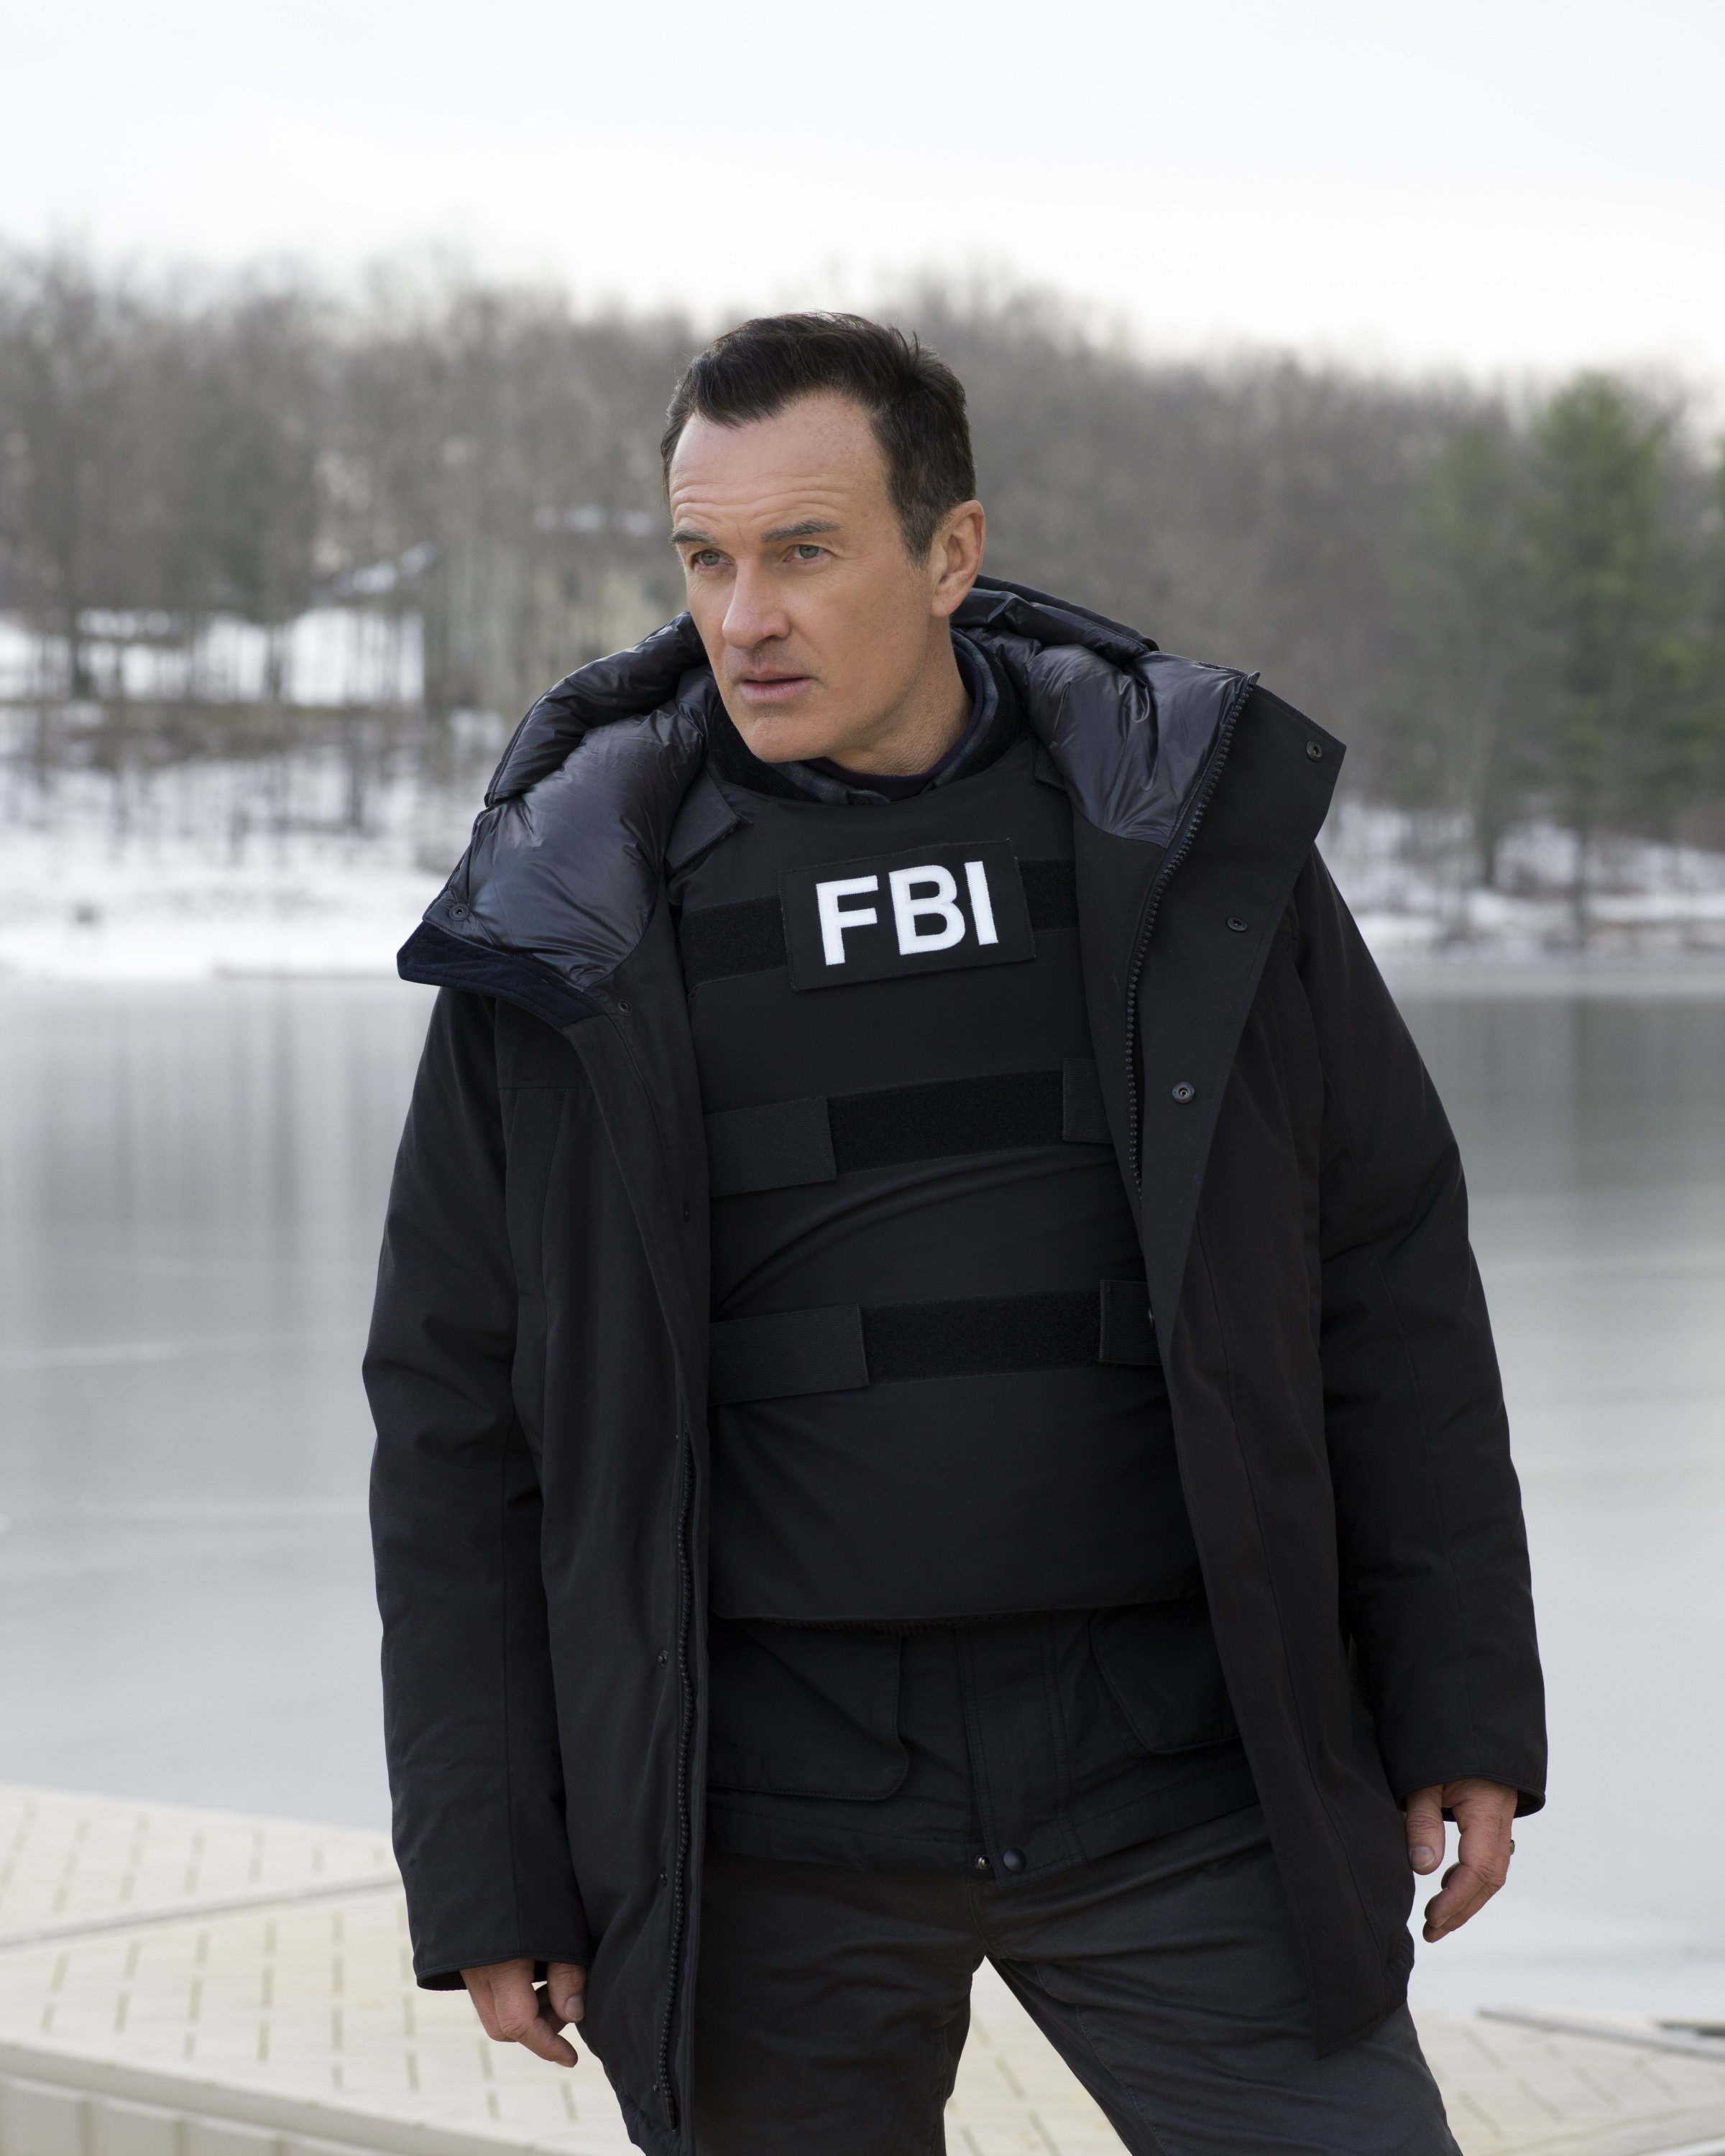 Julian McMahon acting as Jess LaCroix on the set of "FBI: Most Wanted" | Photo: Getty Images